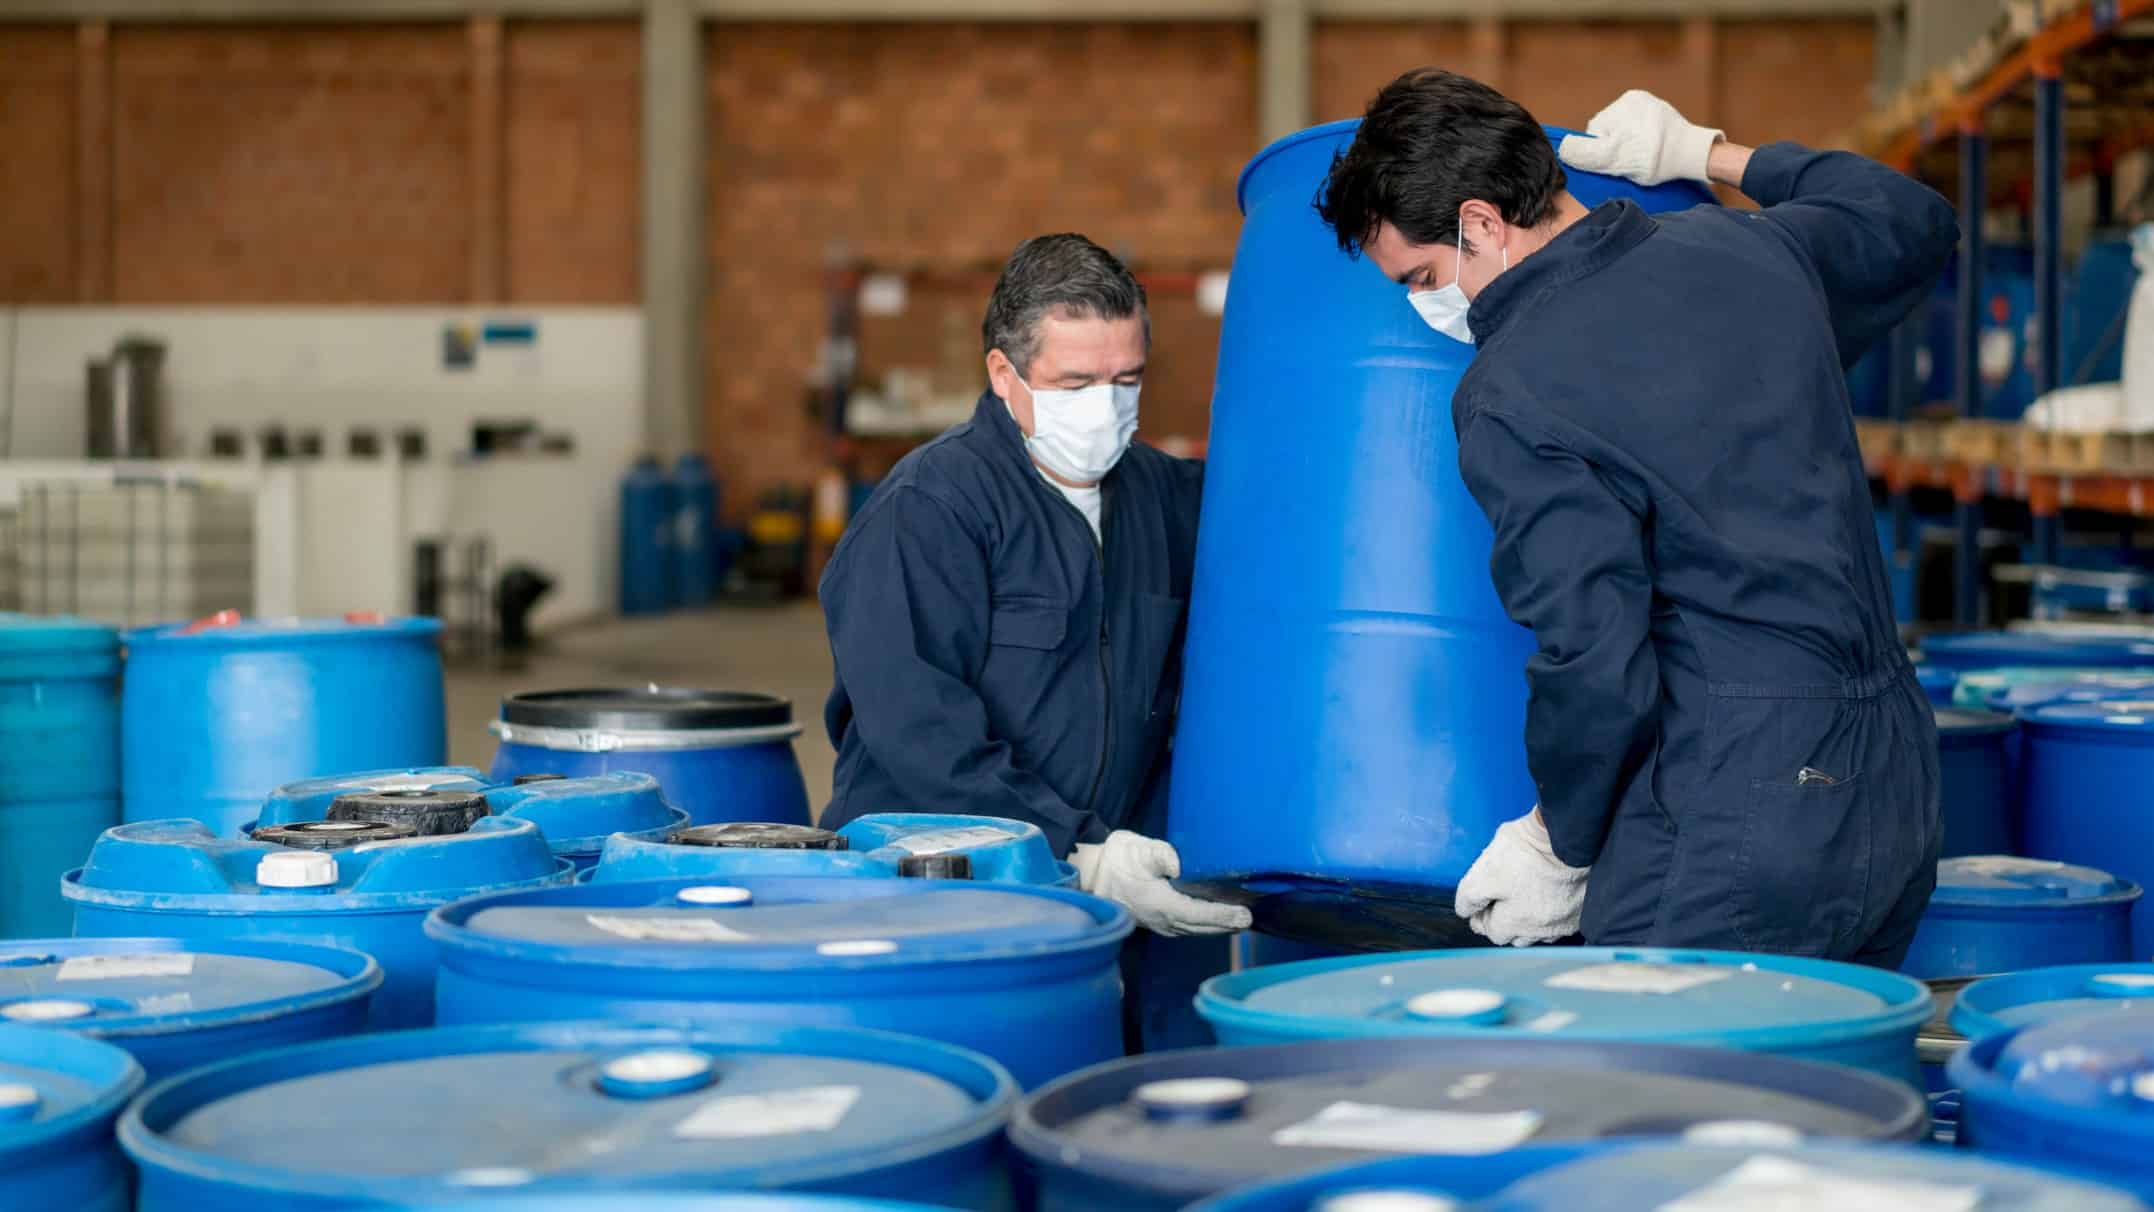 Male DGL employees working with chemical bins symbolising the rising DGL share price today